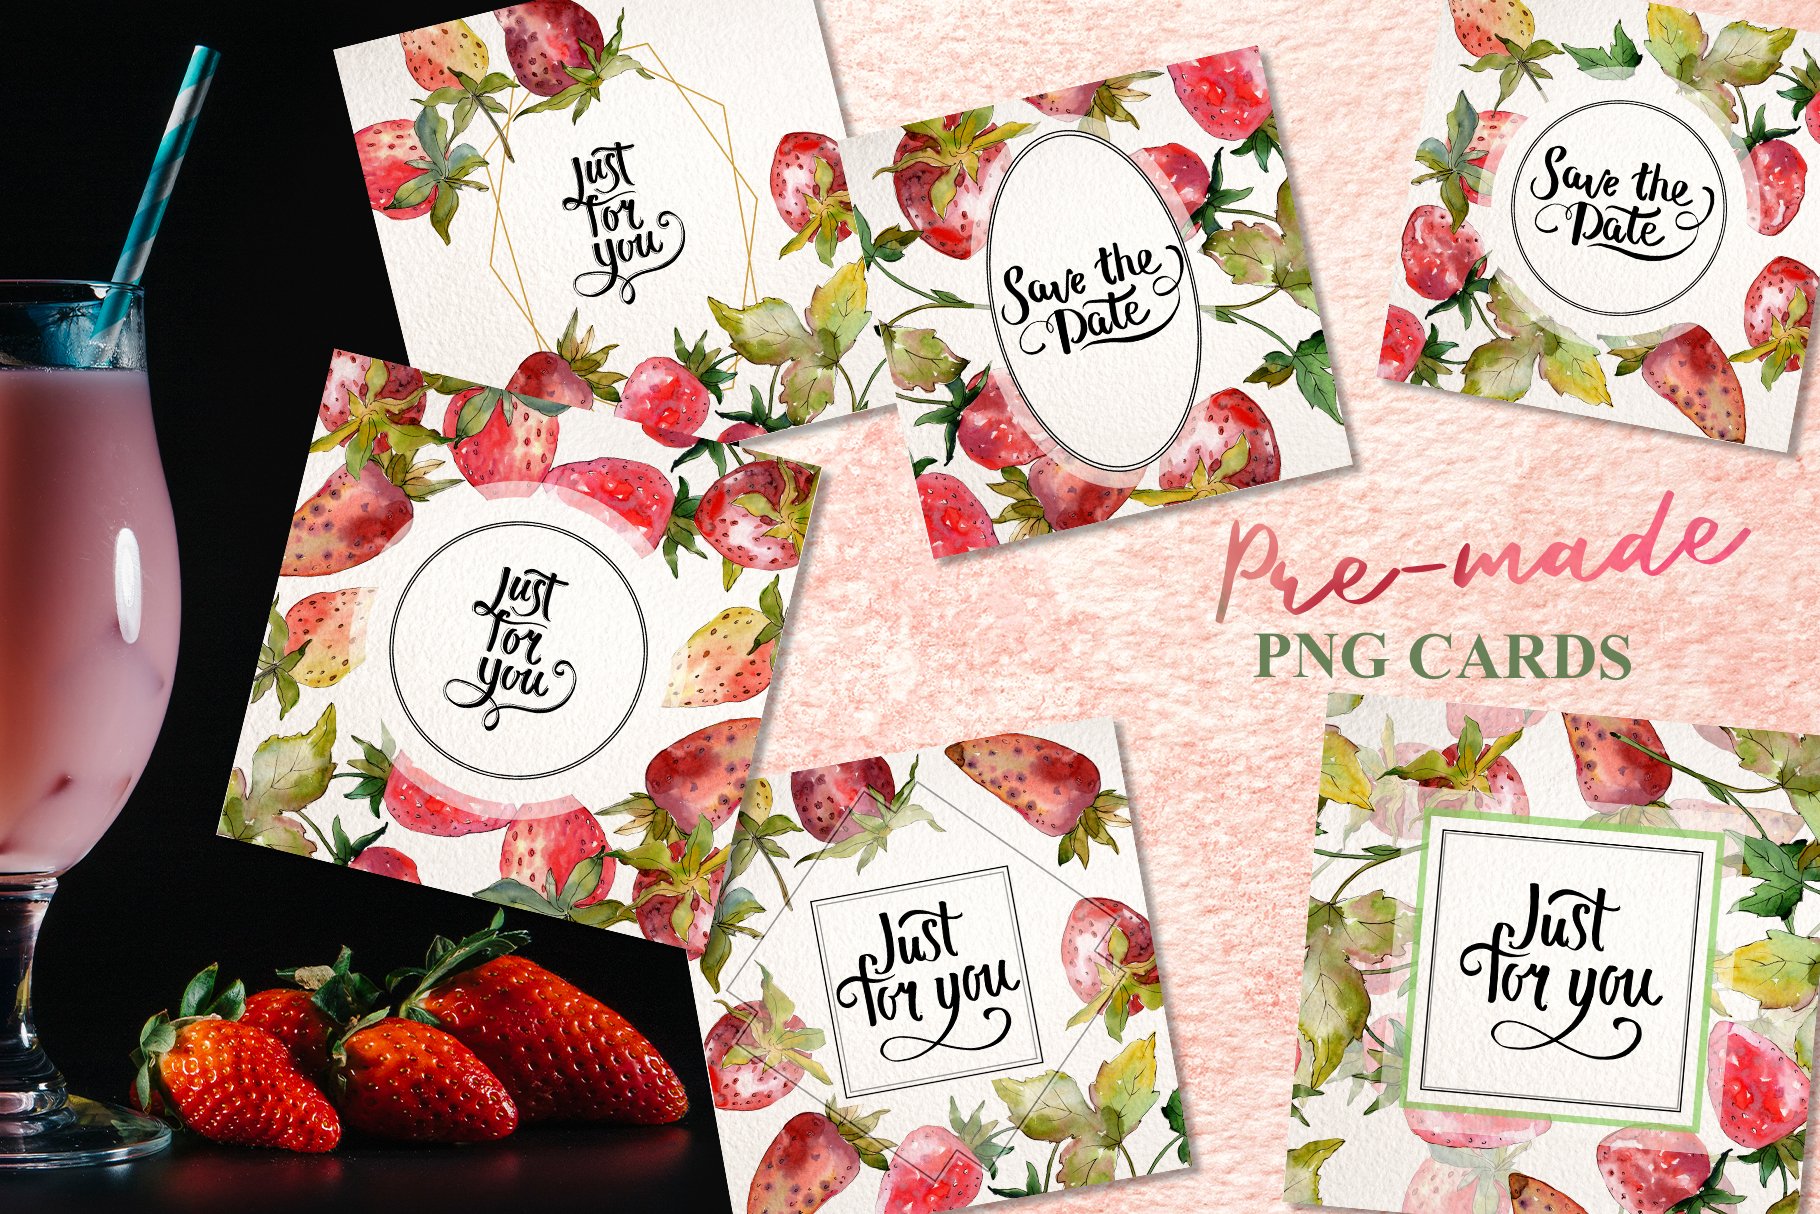 Strawberry cards in a watercolor style.